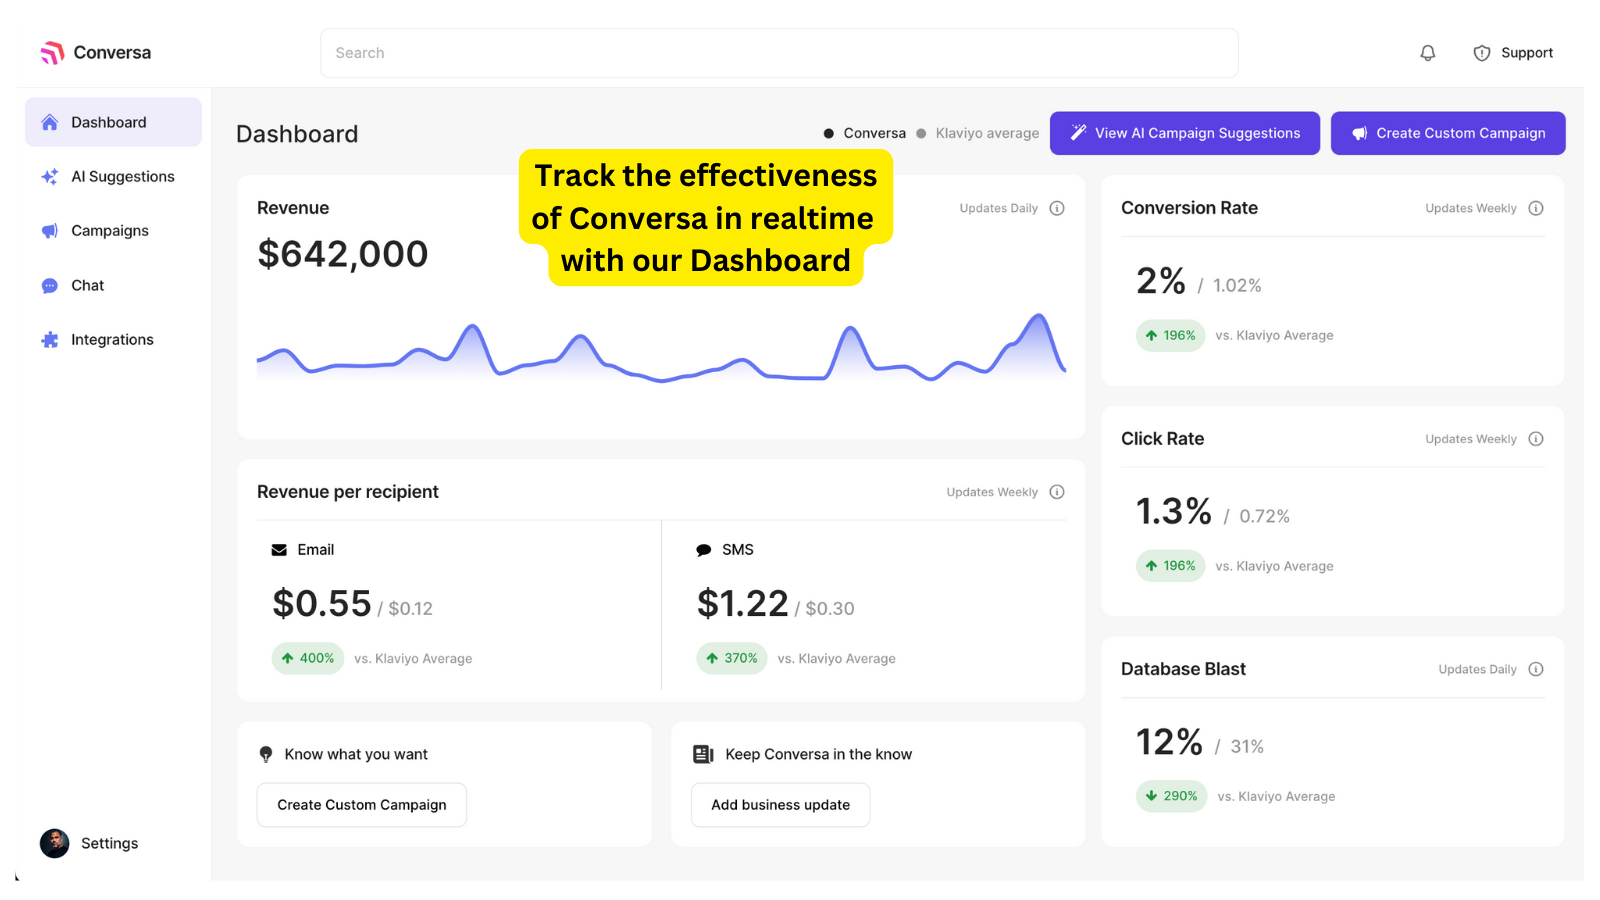 Track the effectiveness of Conversa with our realtime dashboard